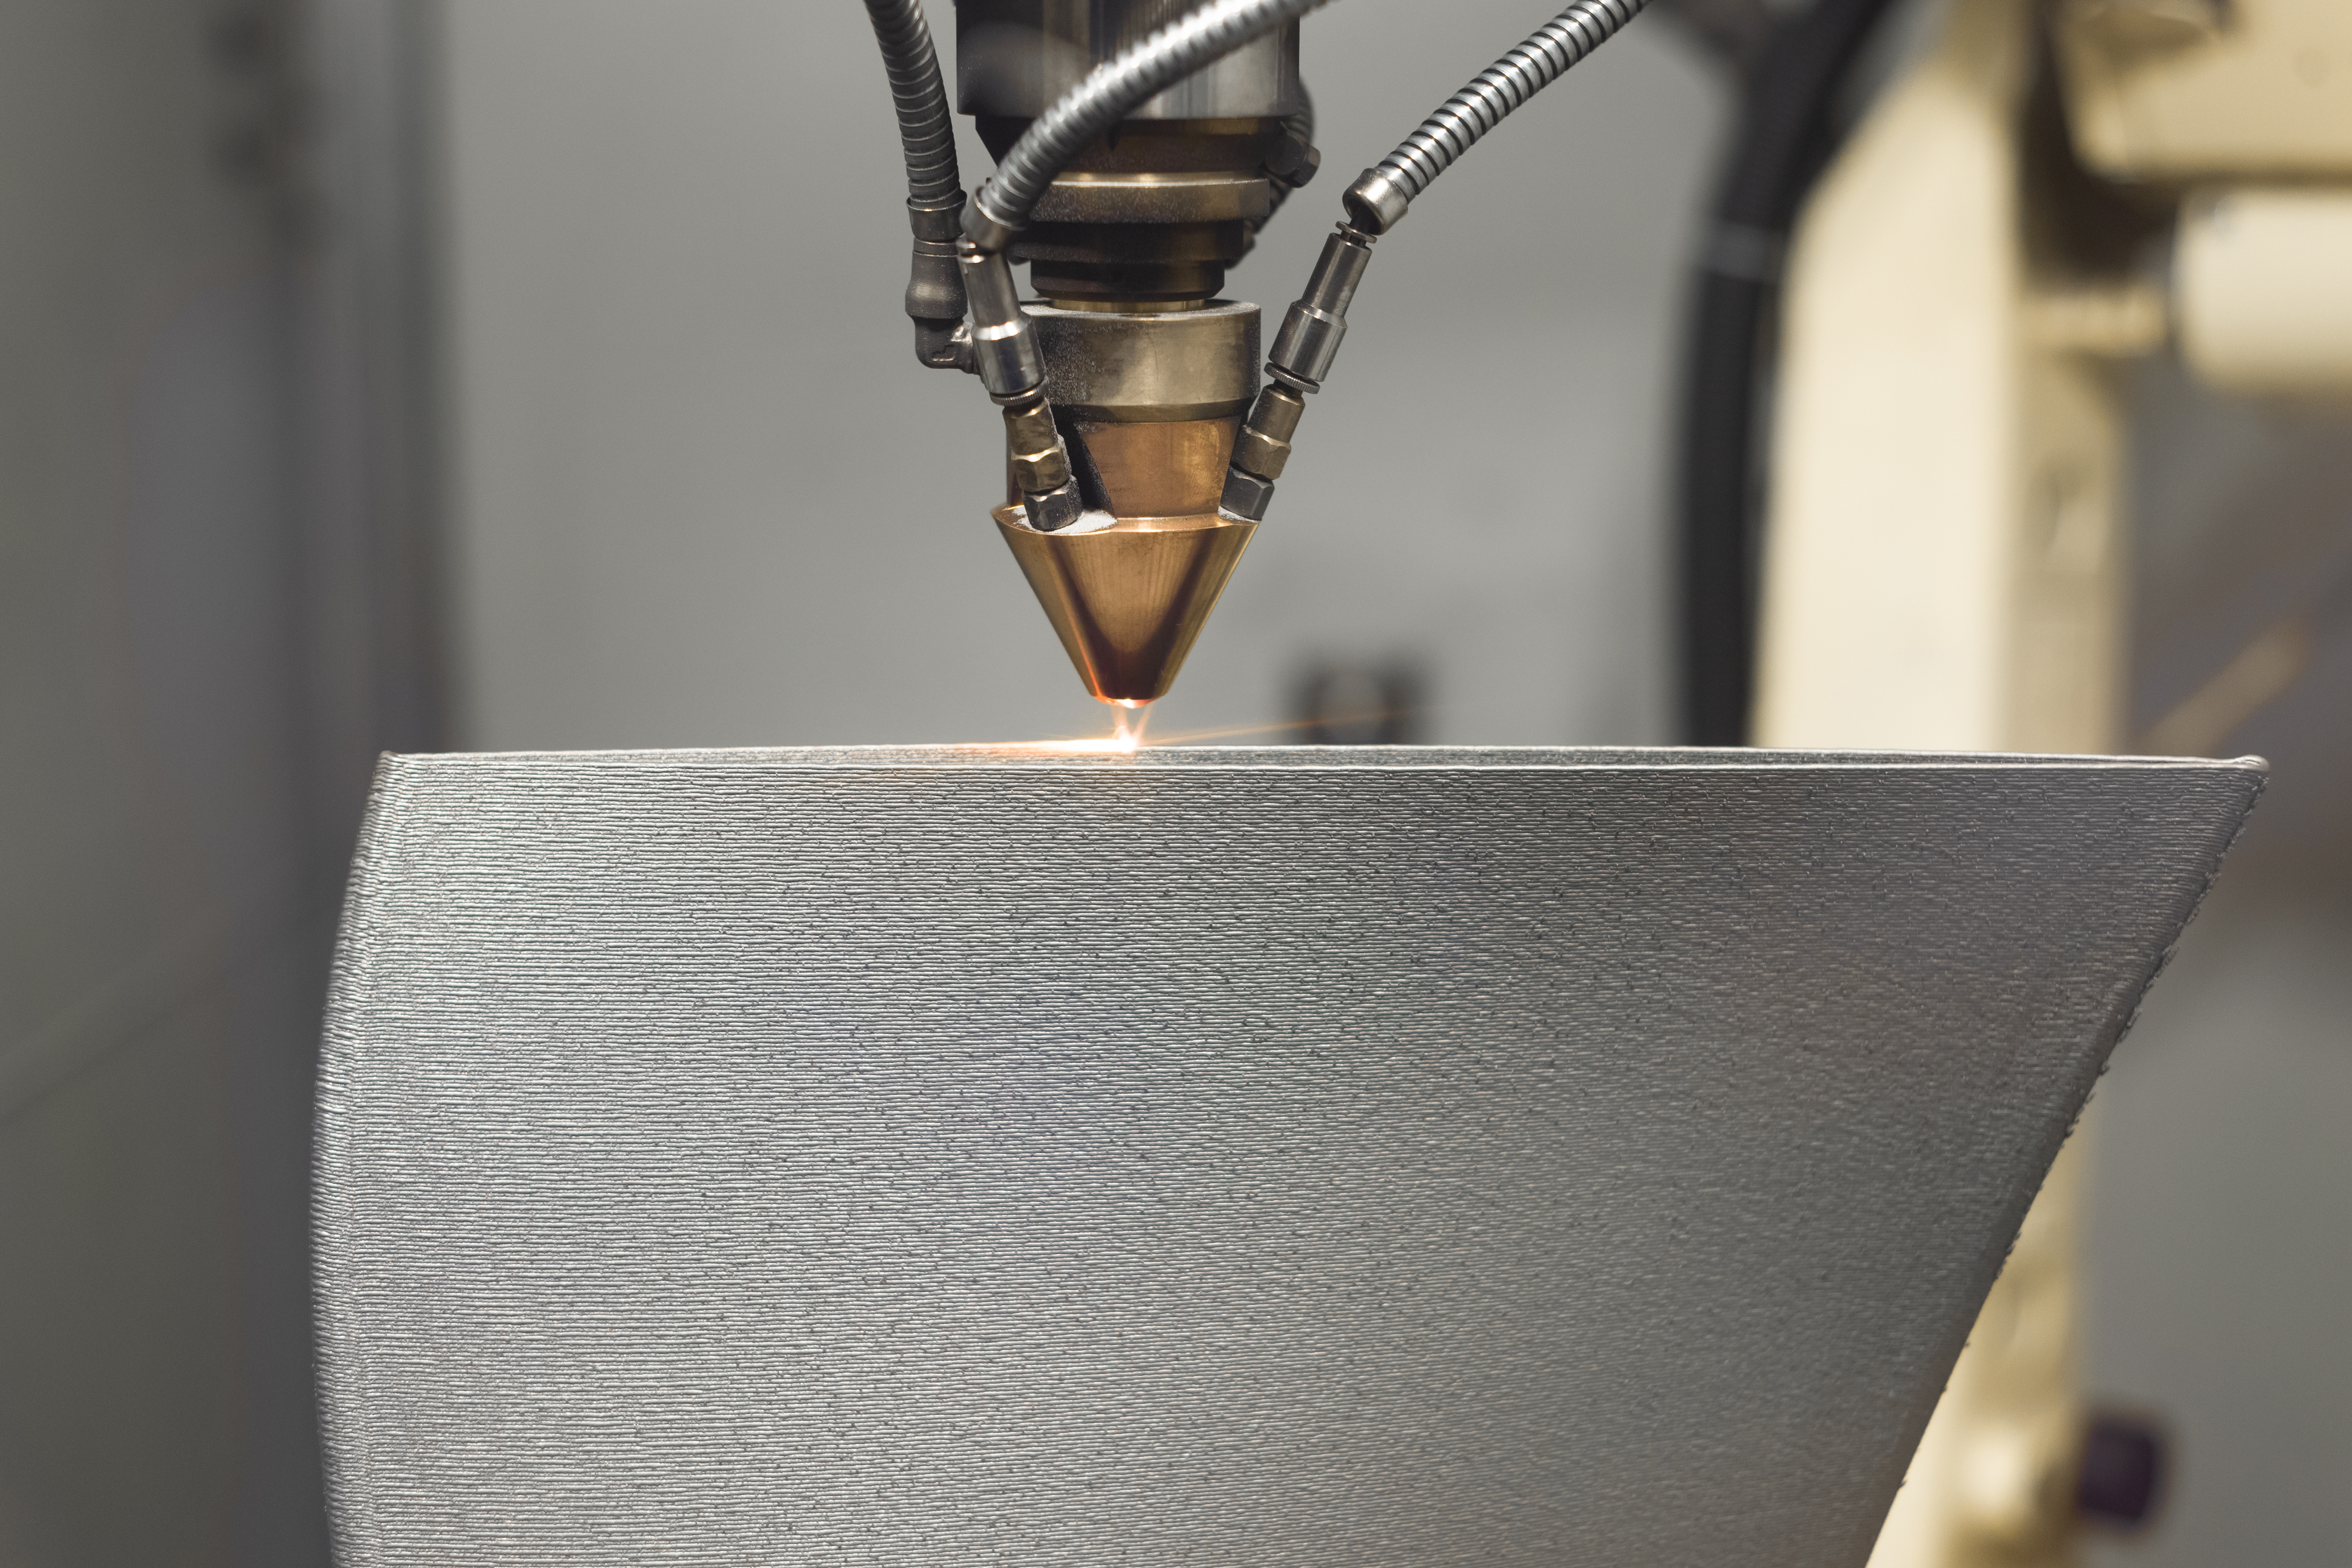 3D metal printer produces a steel part. Revolutionary additive technology for sintering metal parts. Soft focus.